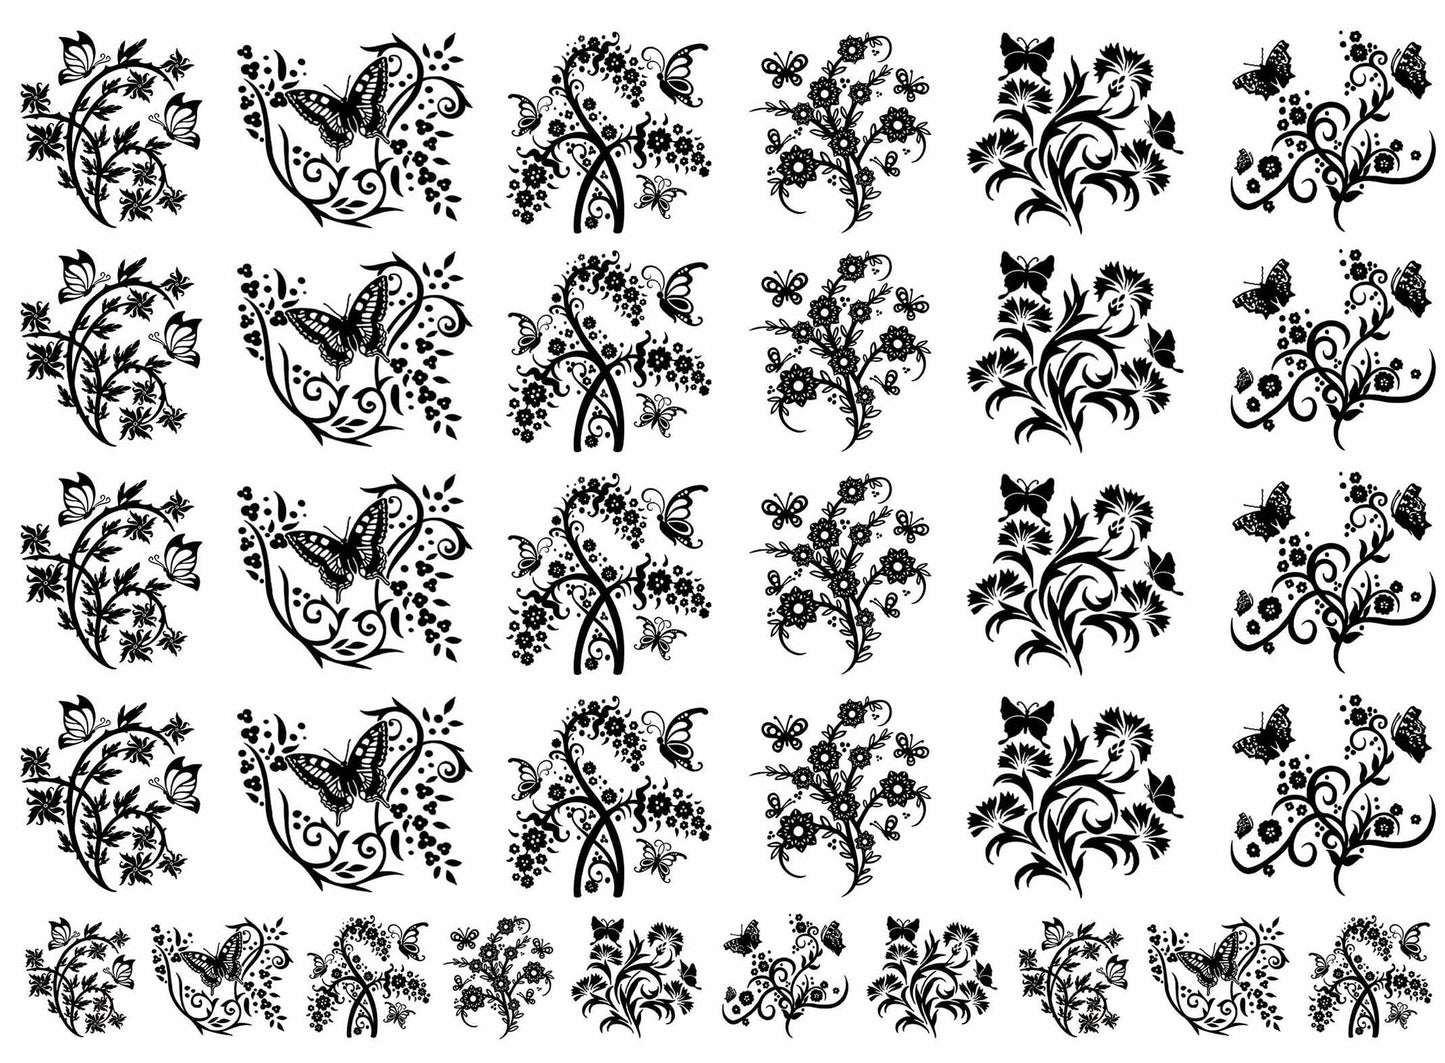 Butterfly Garden 34 pcs 5/8" to 1"  Black Fused Glass Decals